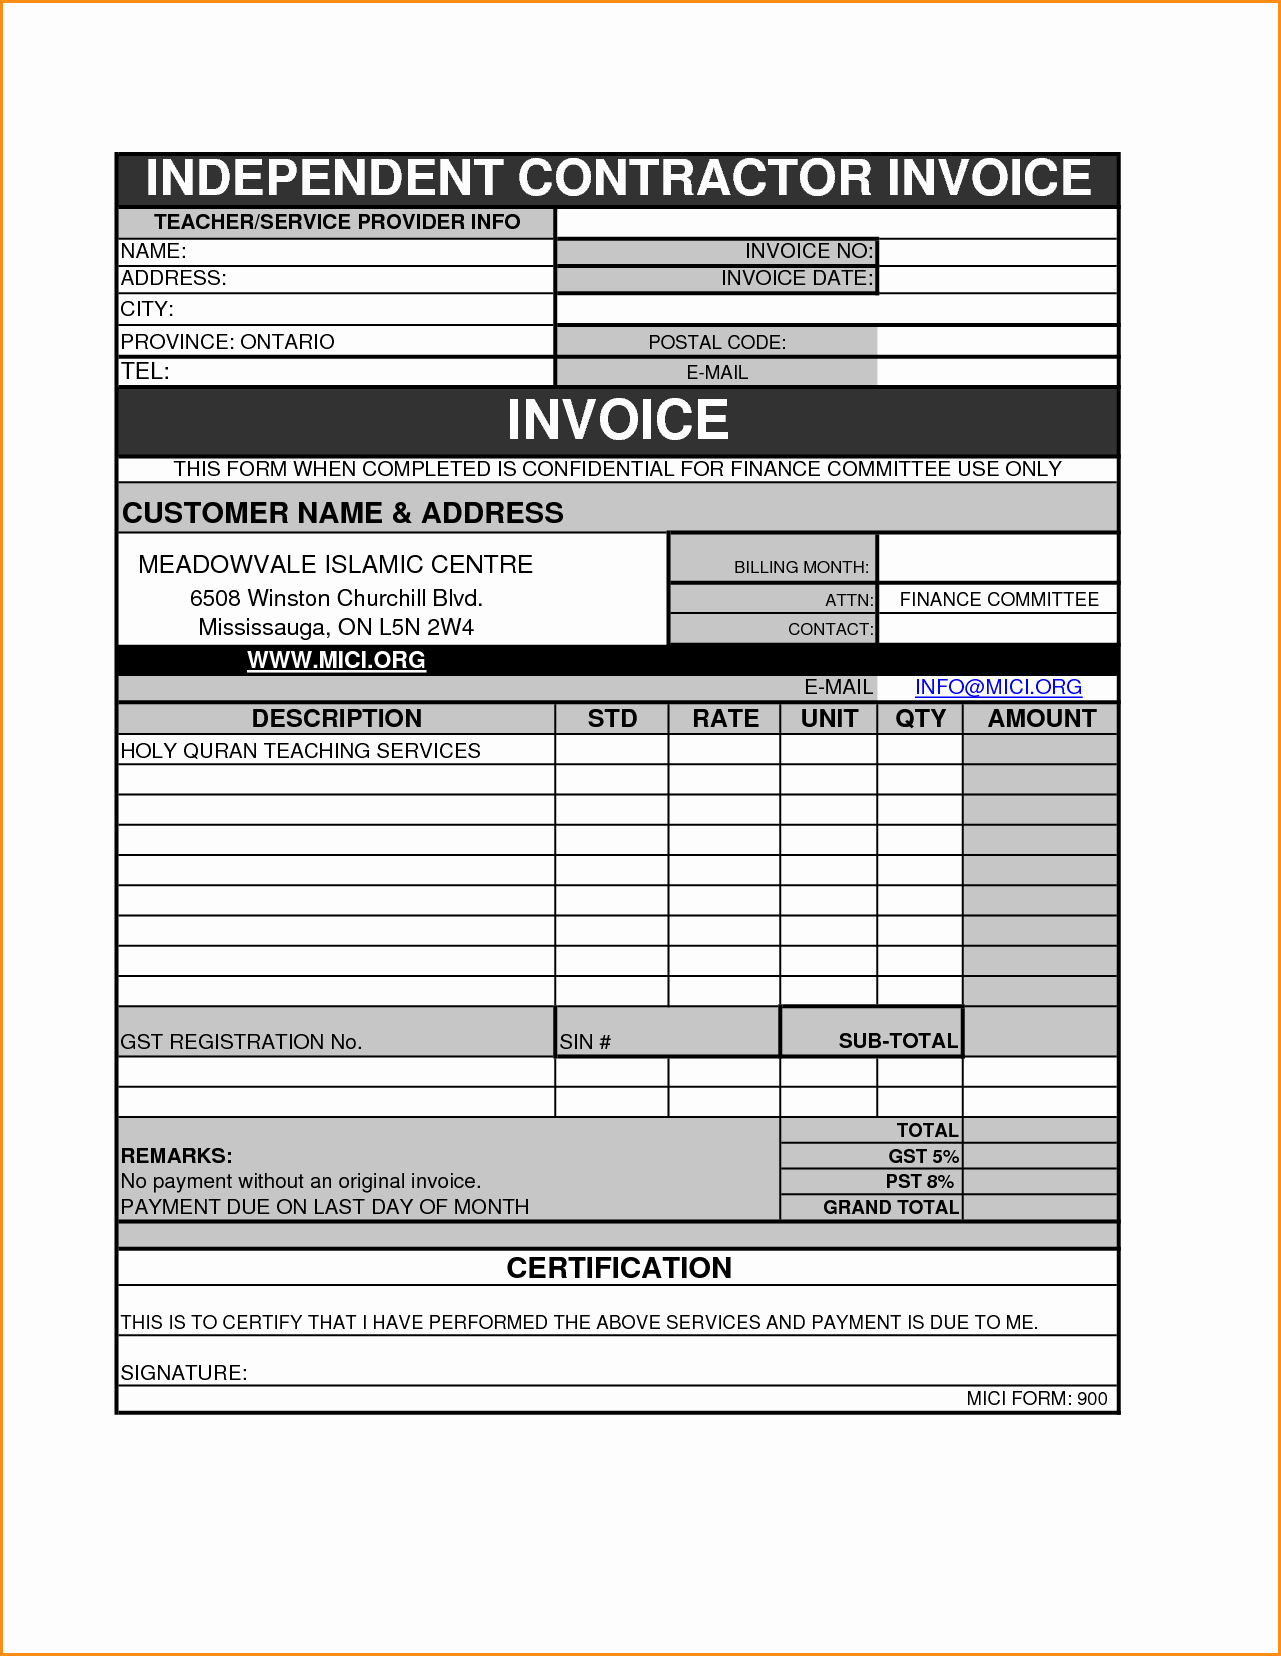 Independent Contractor Invoice Template Inspirational Electrical Contractor Invoice Template